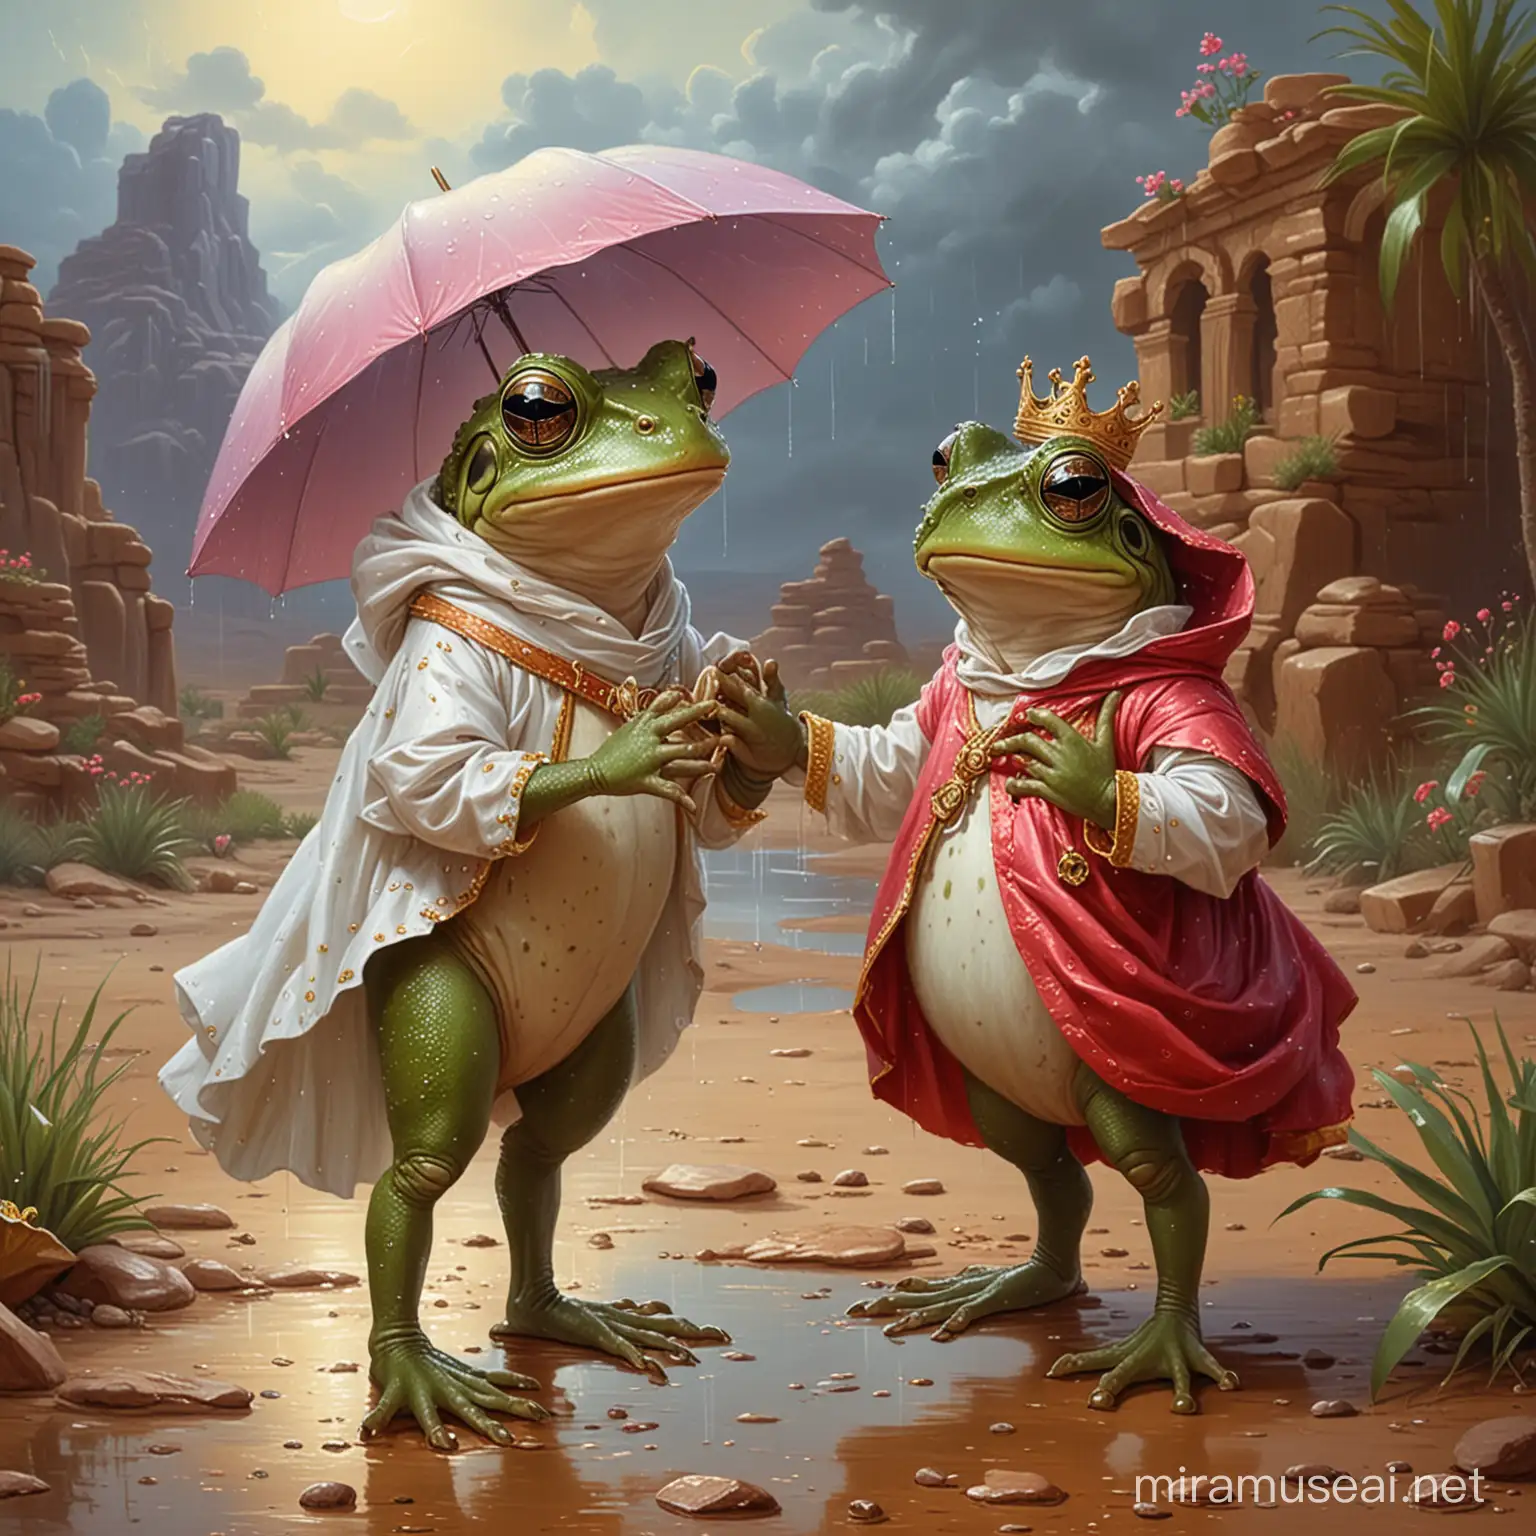 oil painting vintage cartoon little Desert rain frogs play the roles of Romeo(with a prince outfit) and Juliet(with a princess dress).